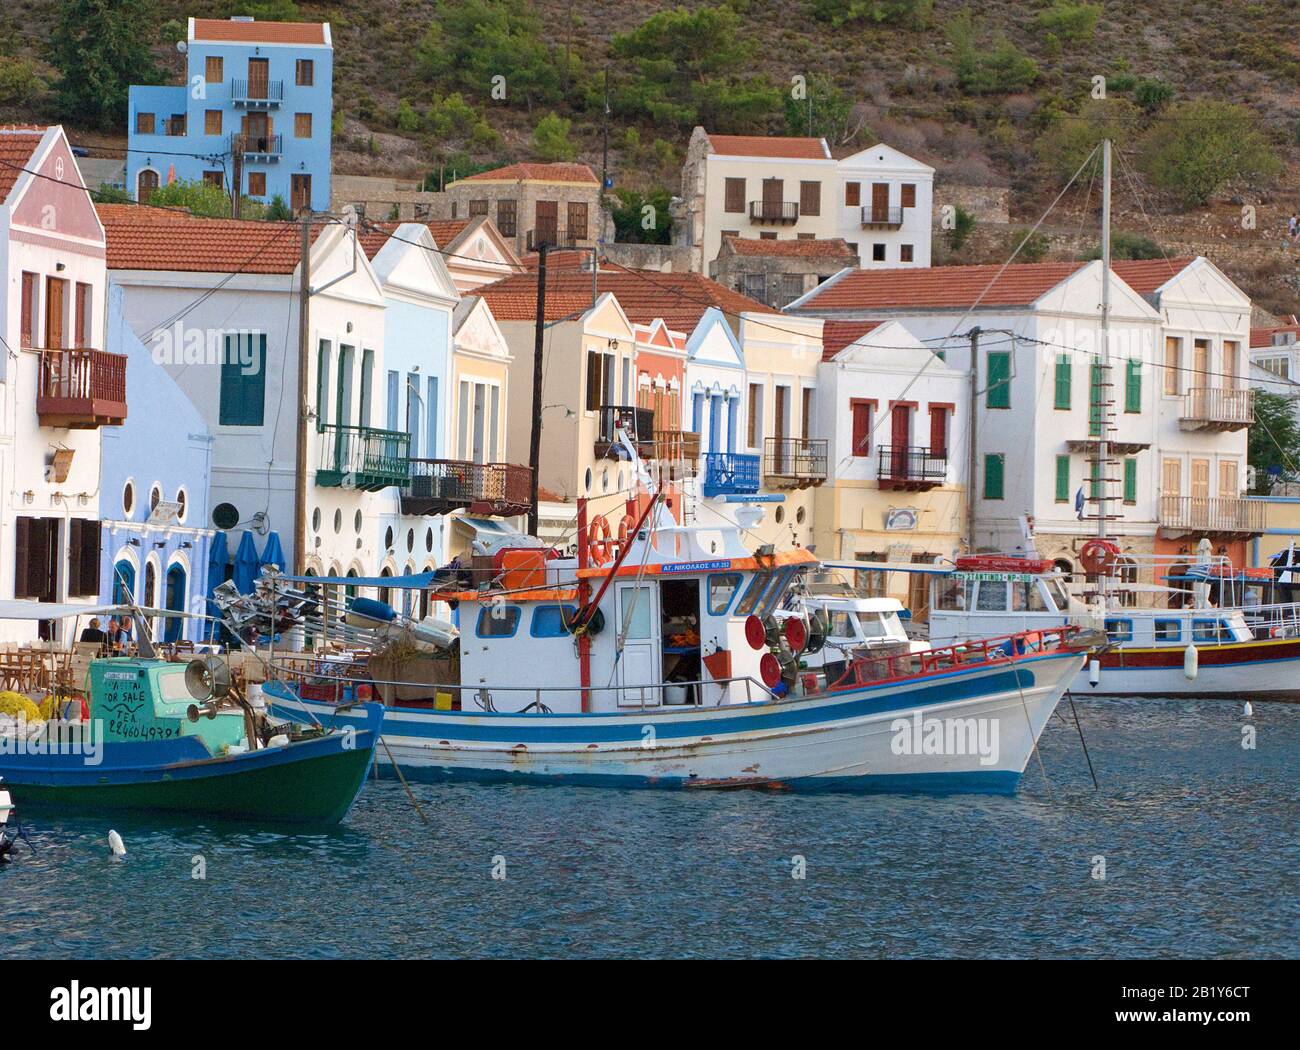 Evening mood at Meis island, also known as Kastellorizo, fishing boats in the harbour, Meis island, Greece Stock Photo